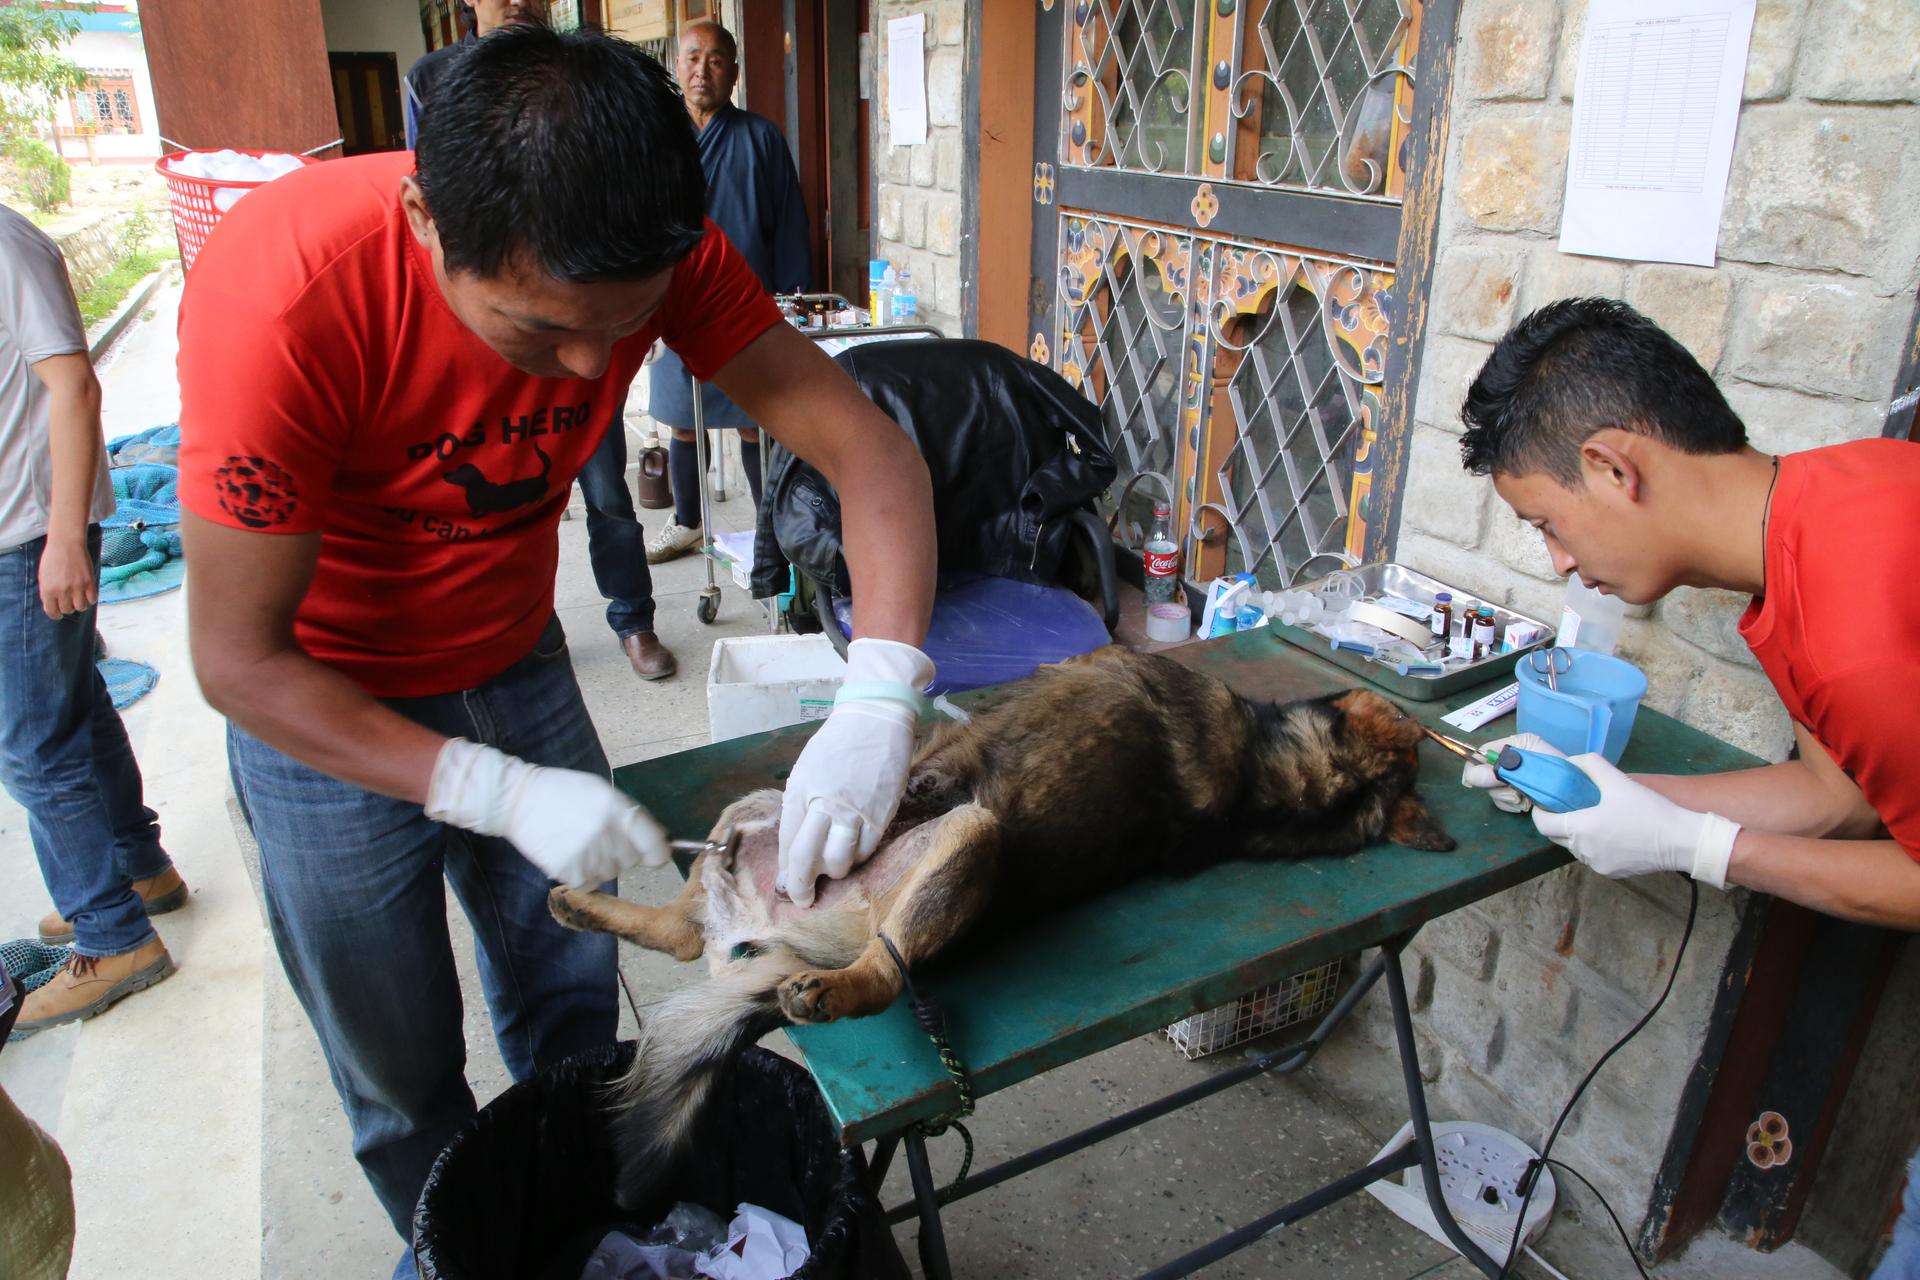 In pre-op at a clinic in the Bhutanese city of Paro, one vet tech shaves and sterilizes a male dog before surgery, while another cuts and cauterizes a notch in the left ear to identify the dog as having been neutered.